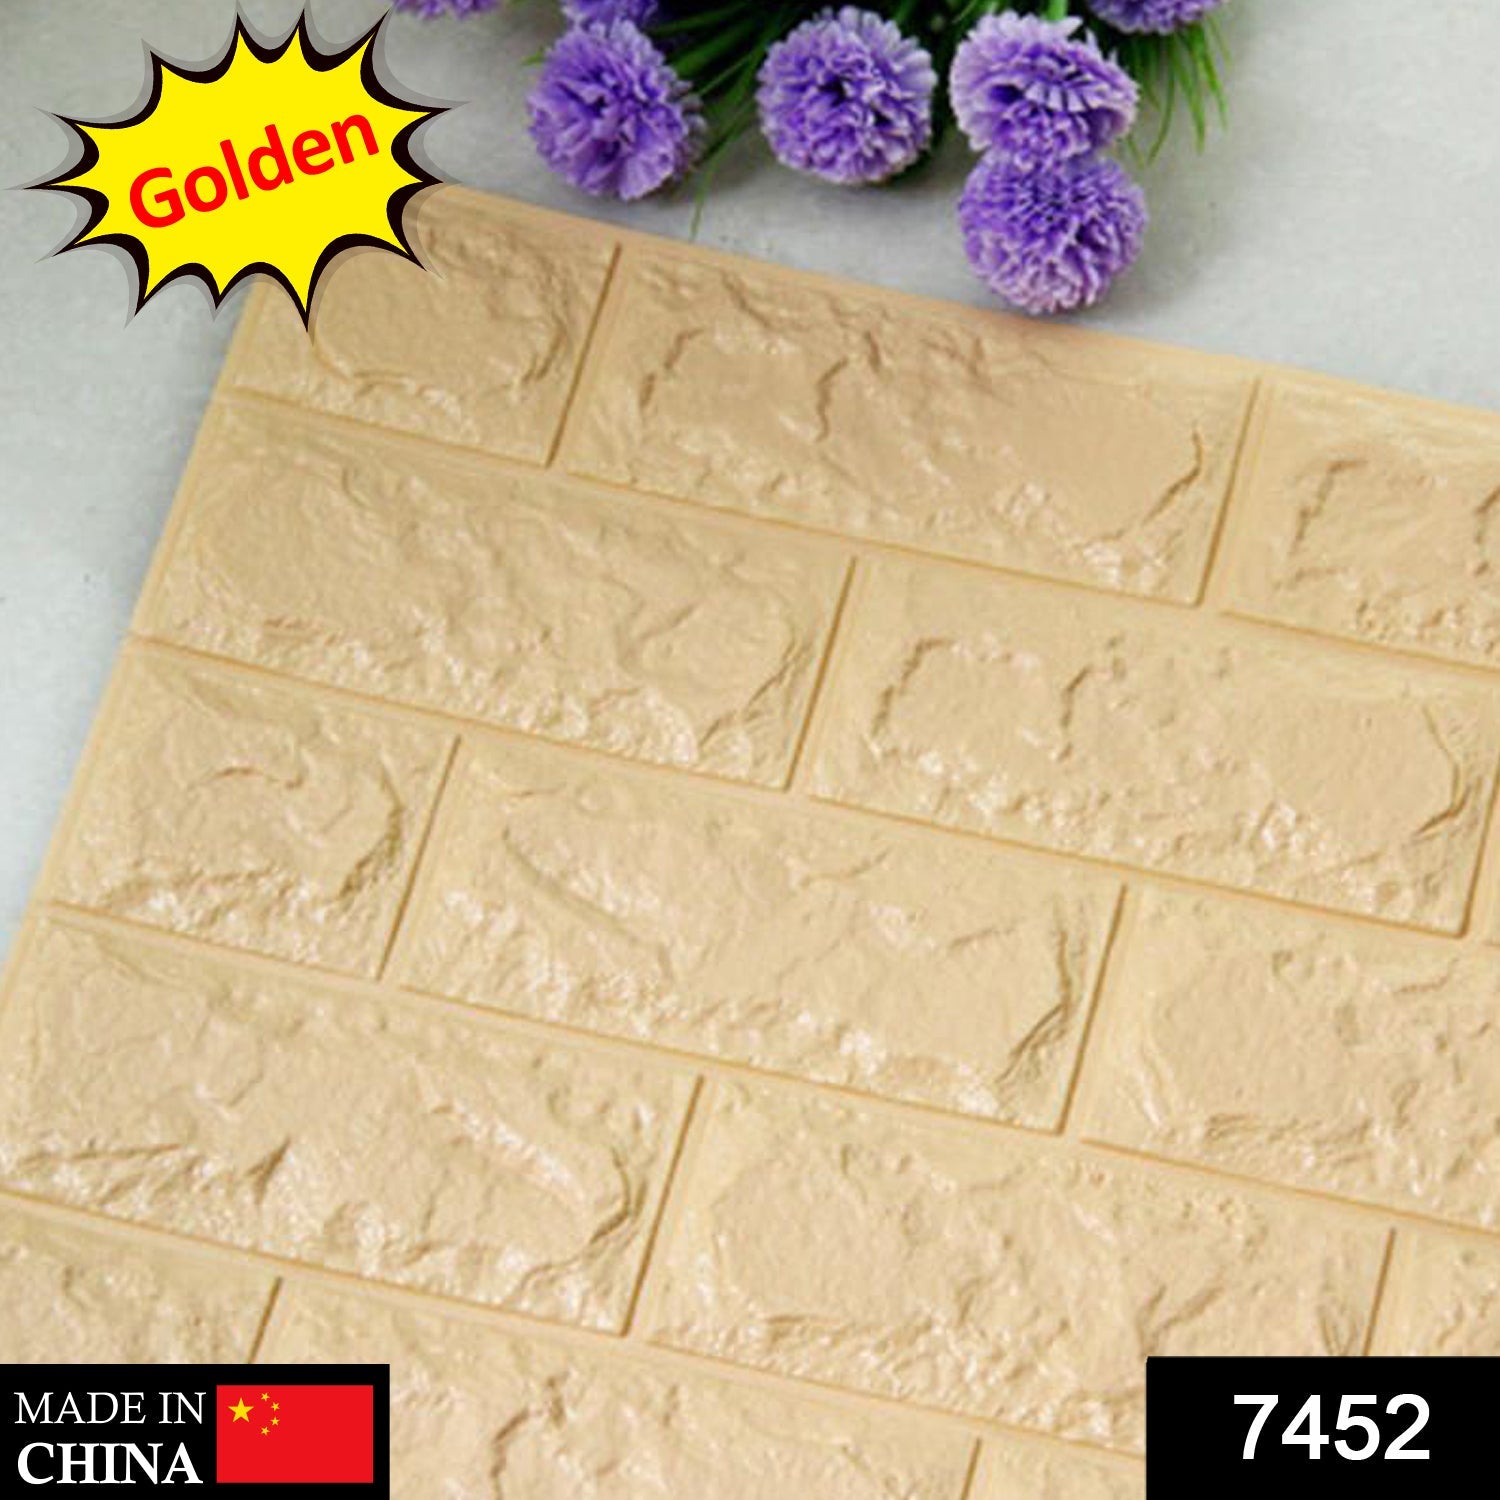 7452 Golden 3D Wall Decor used for wall decoration and maintaining purposes in all kinds of places like household and official etc.